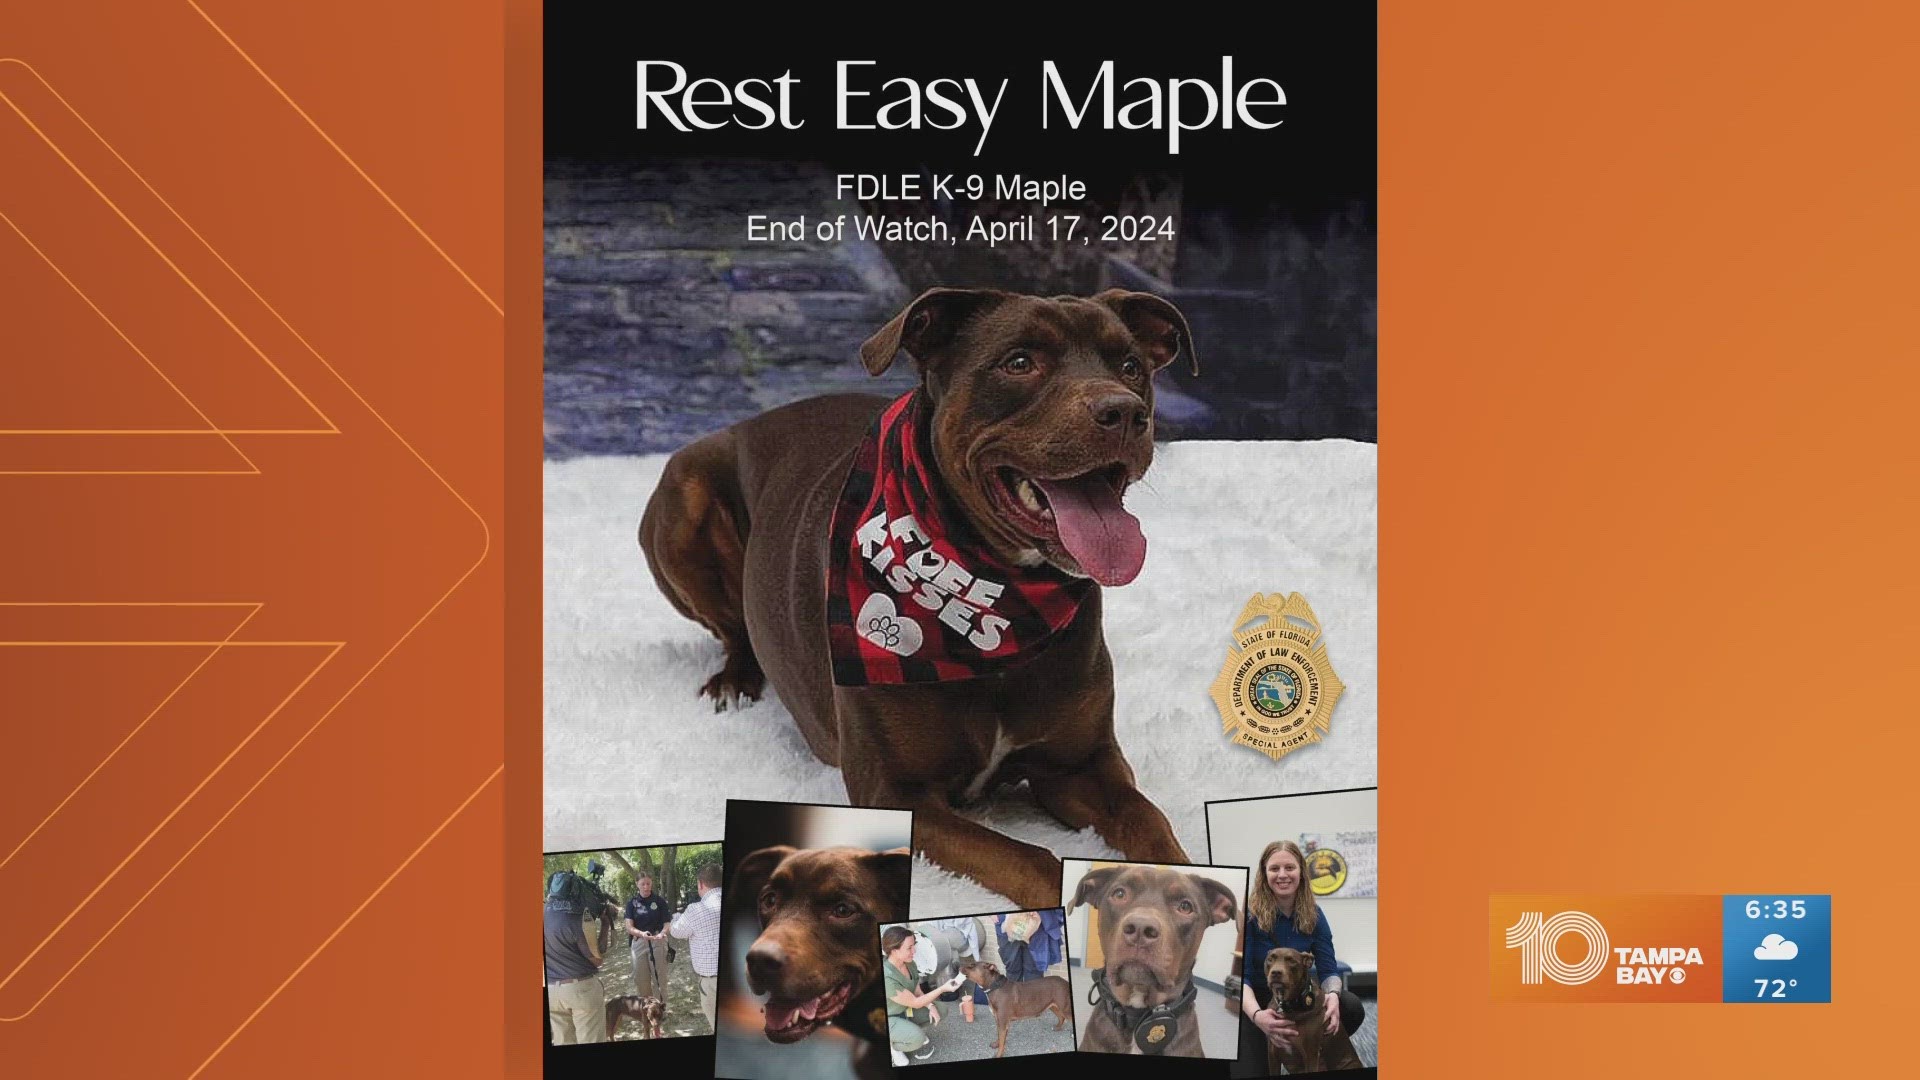 Maple started in 2019 working as the only electronic storage detection K-9 in the Florida panhandle.